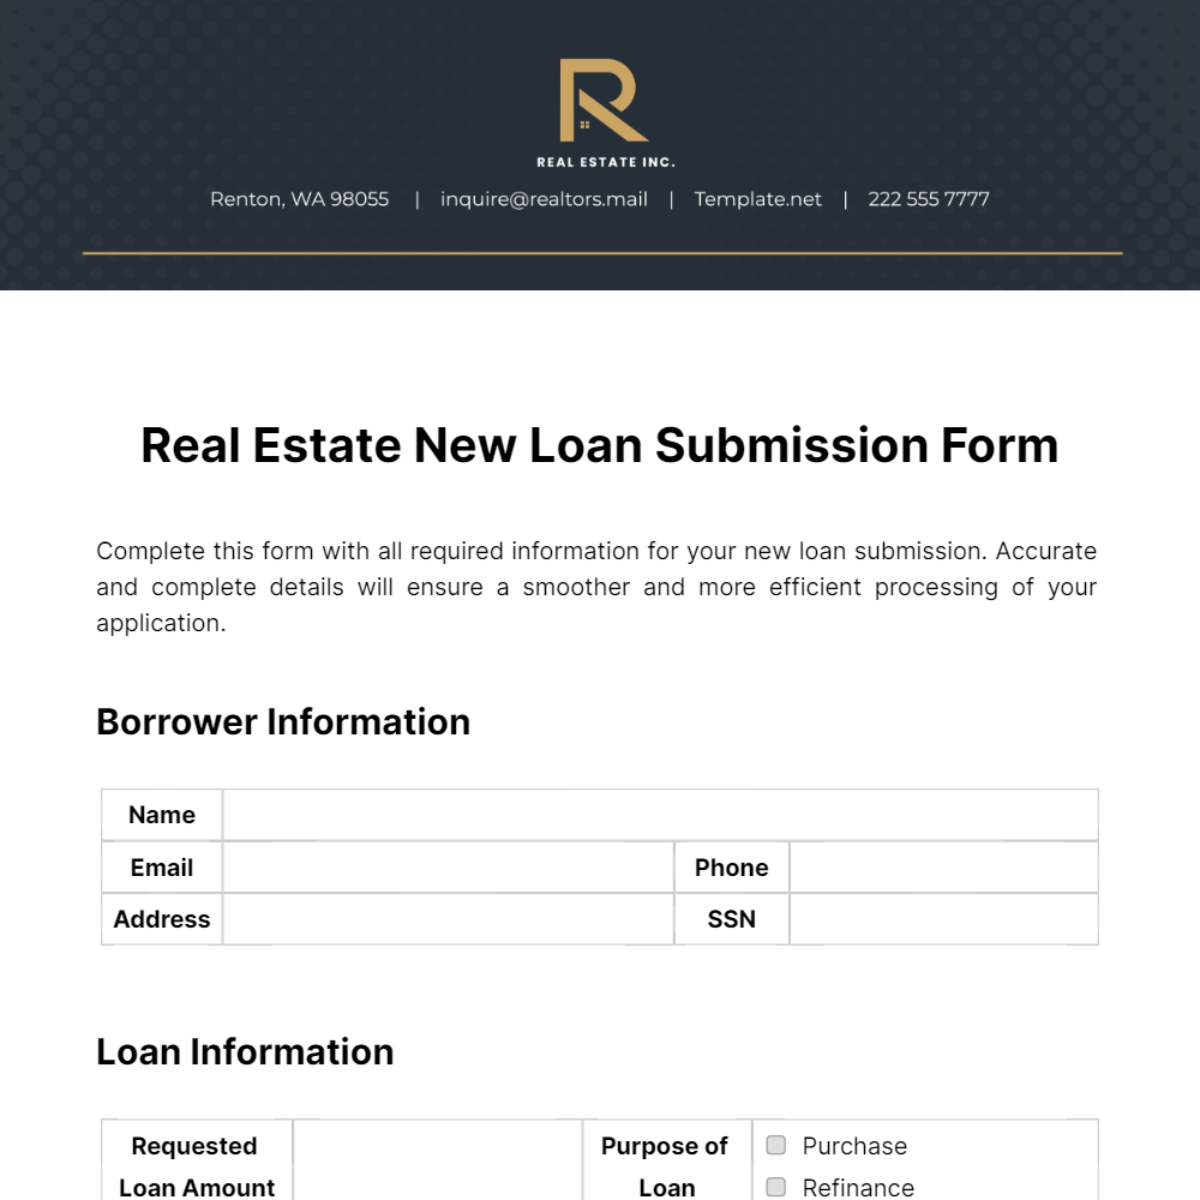 Real Estate New Loan Submission Form Template